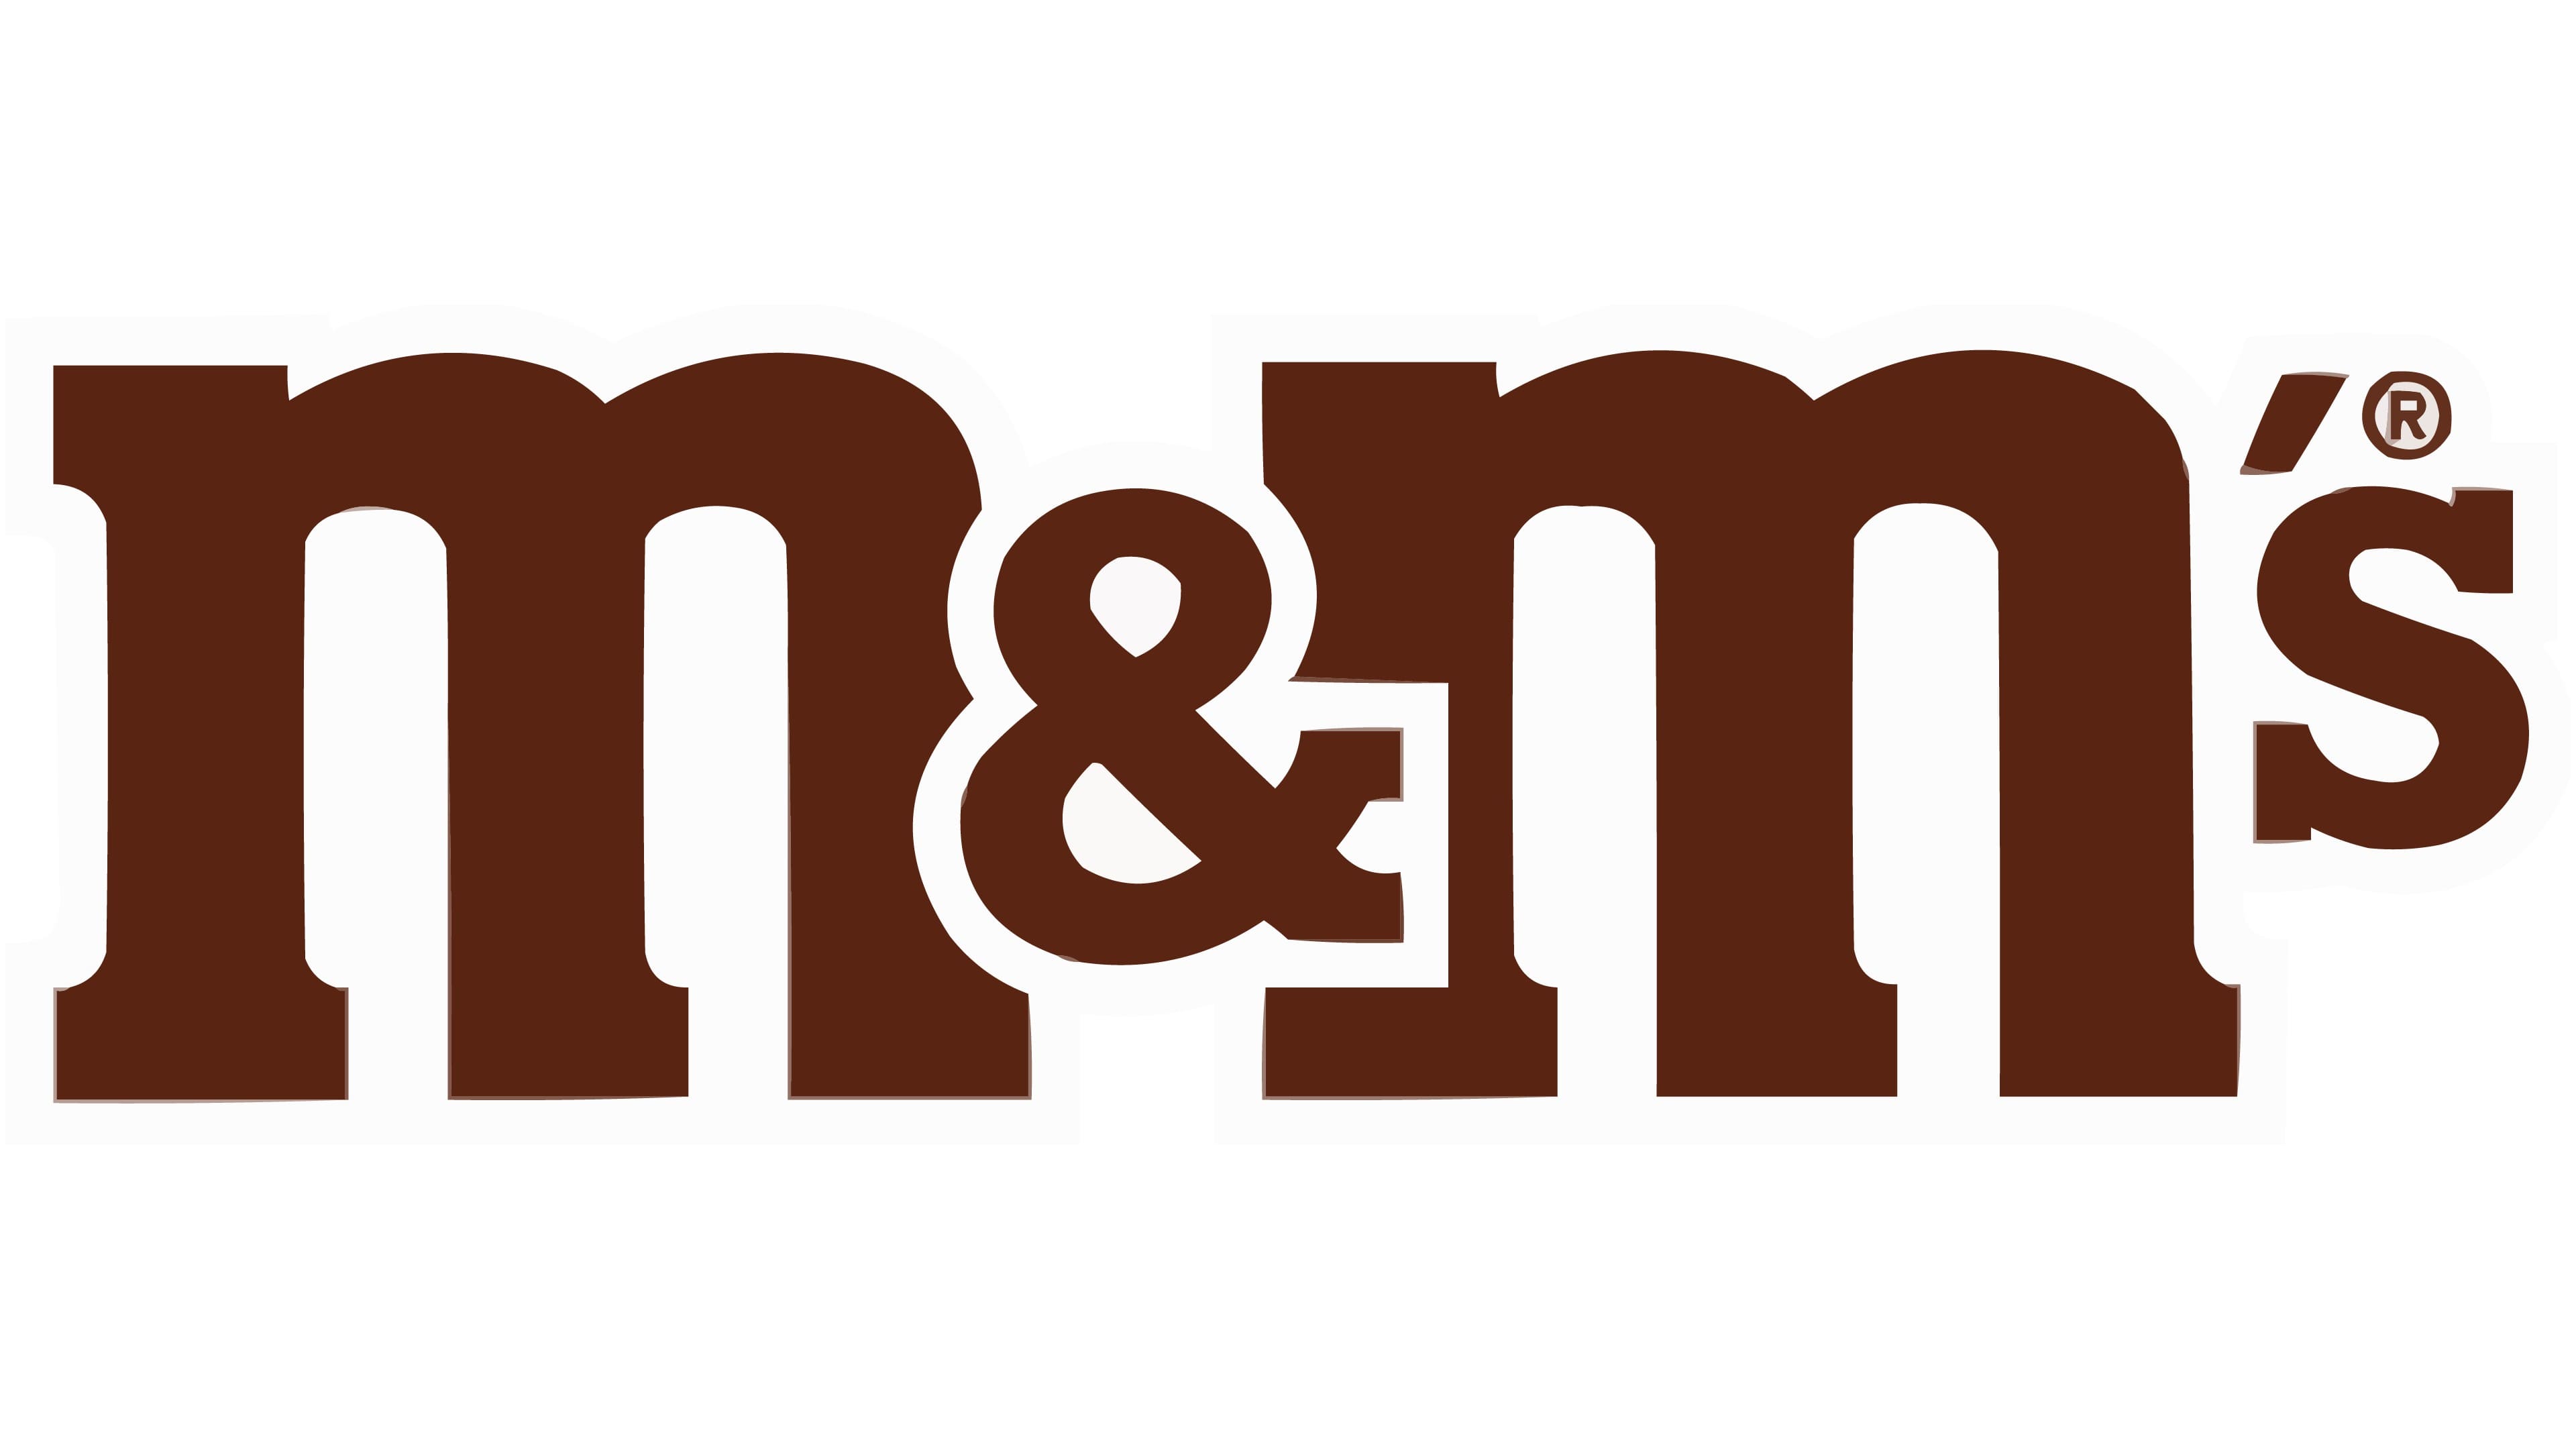 m and m brown